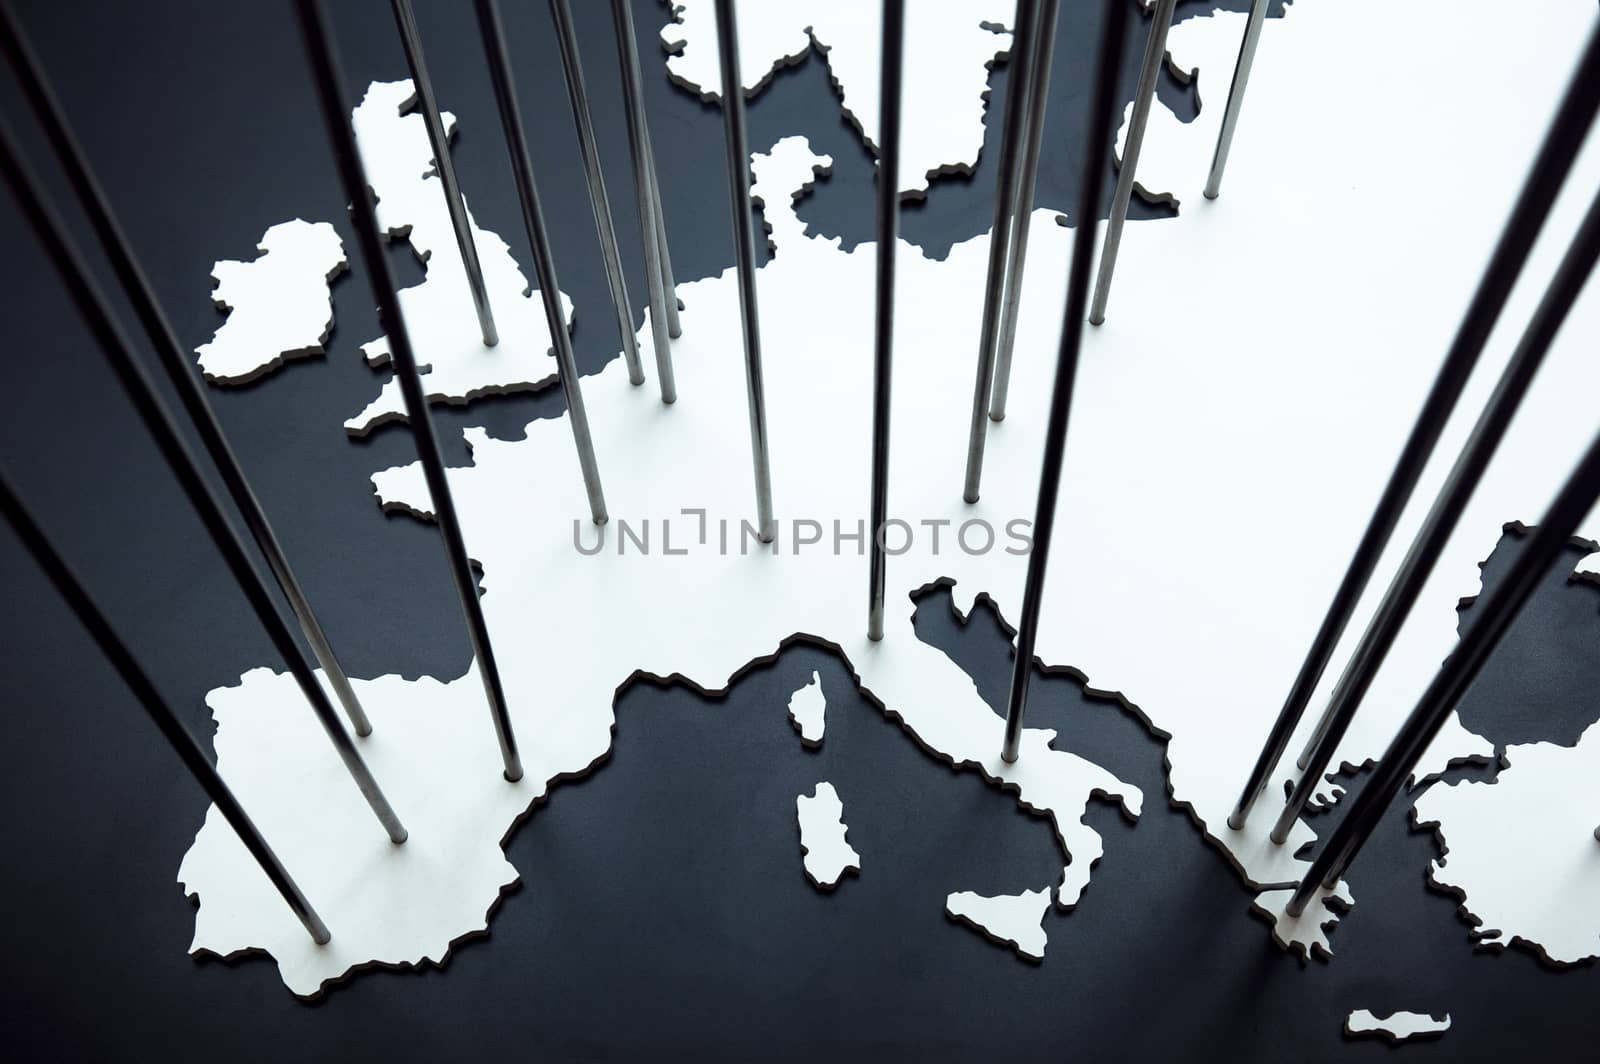 The map of Europe, with metal rods suitable for technological use